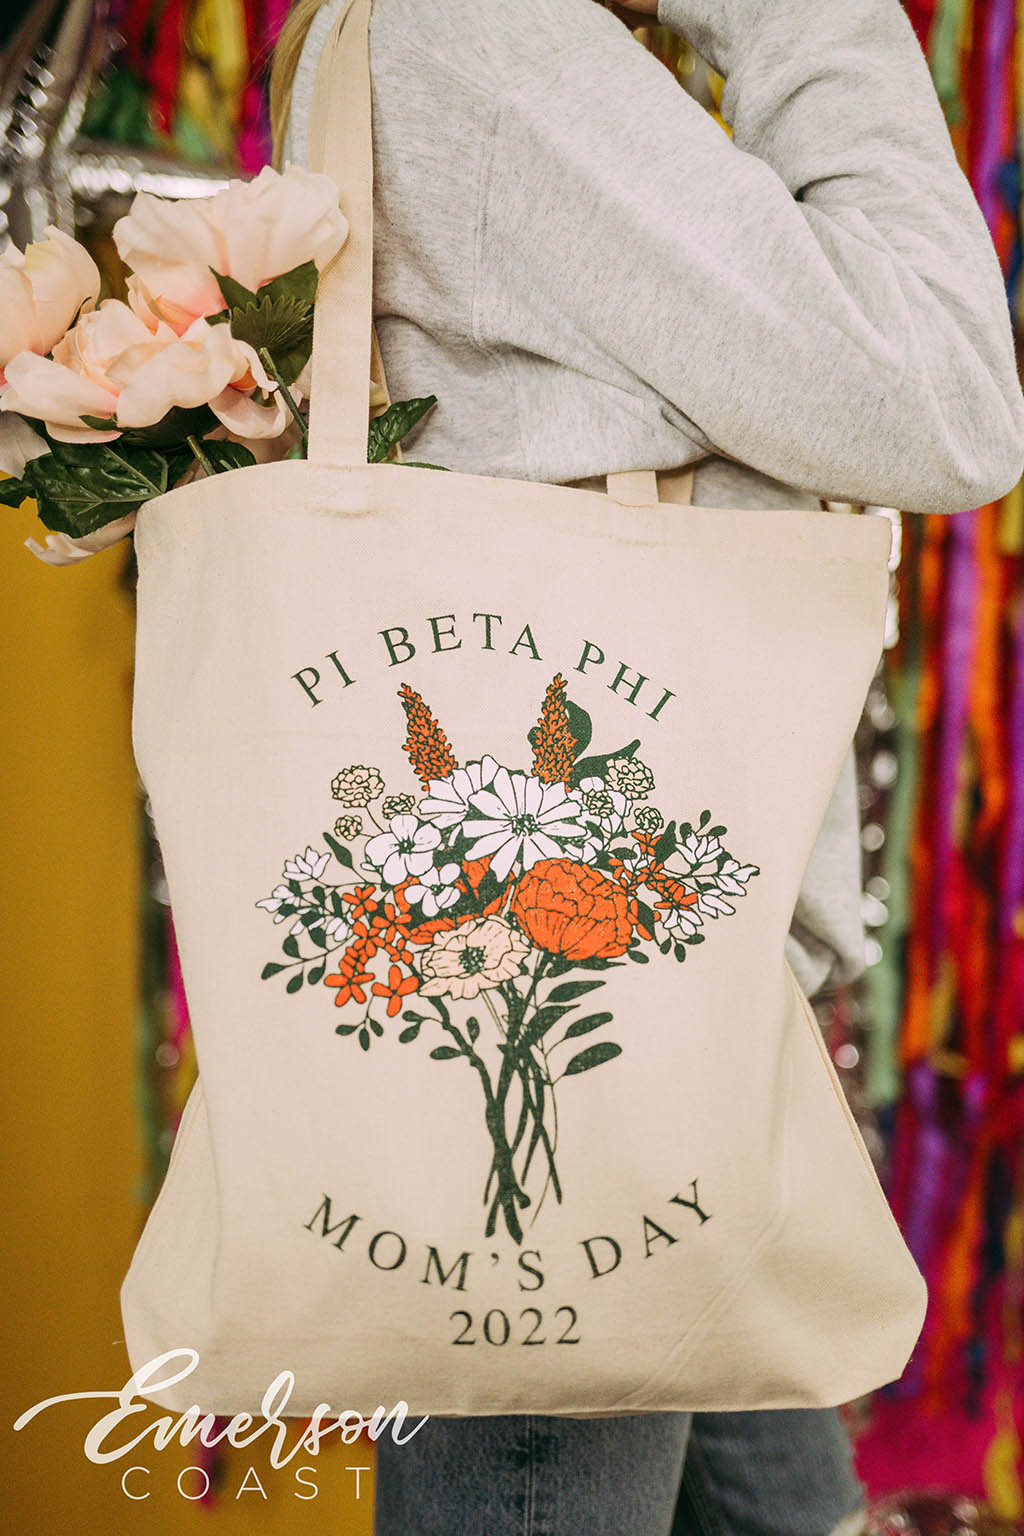 Mothers Day Flowers Tote Bag